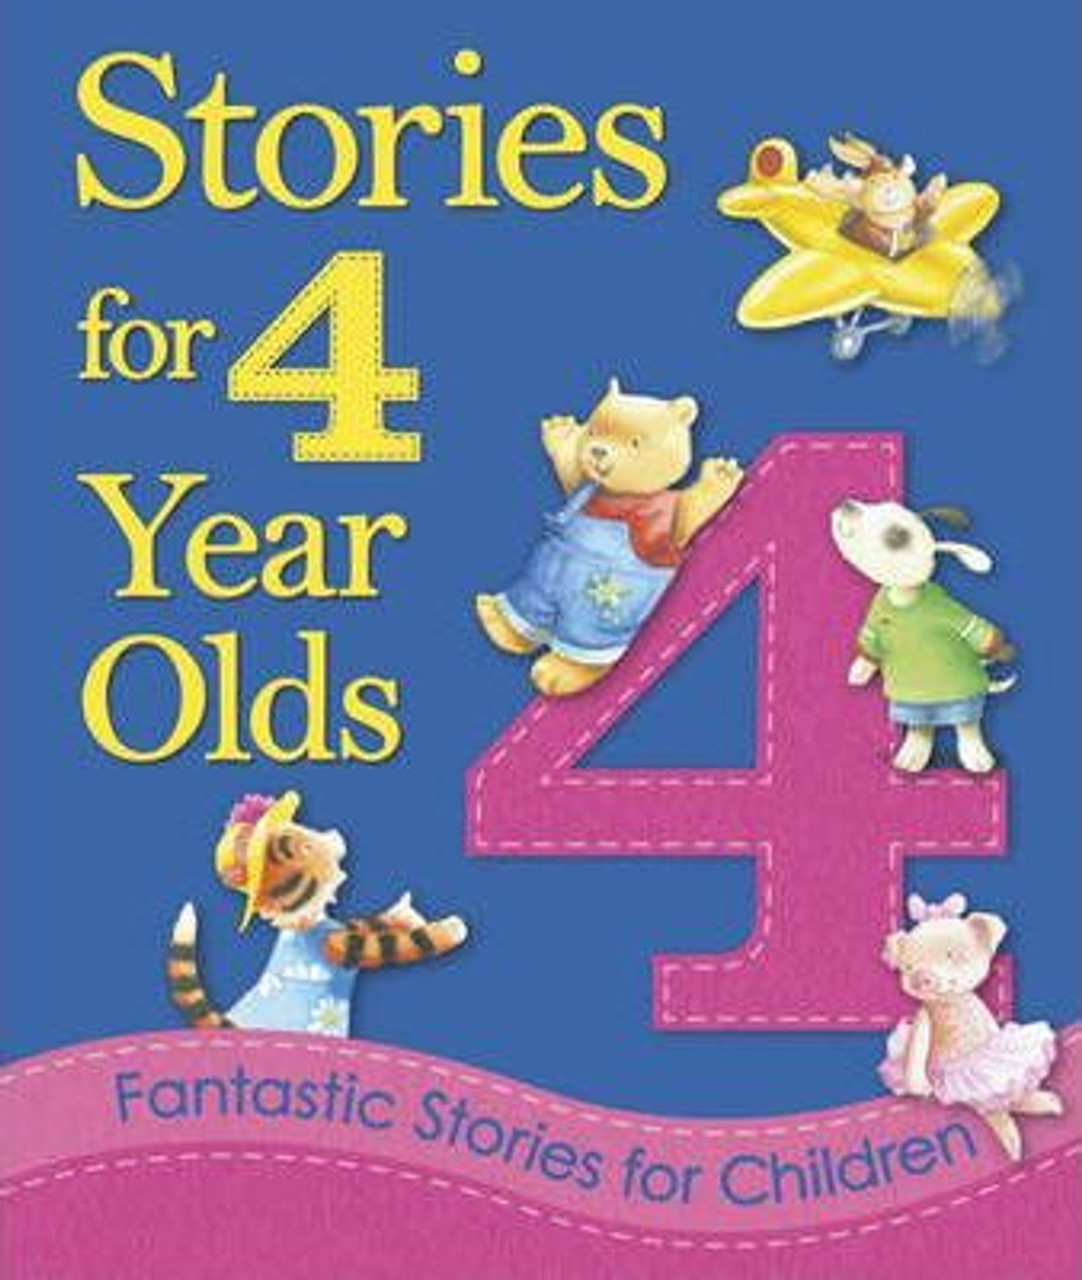 Storytime for 4 Year Olds (Children's Coffee Table book)